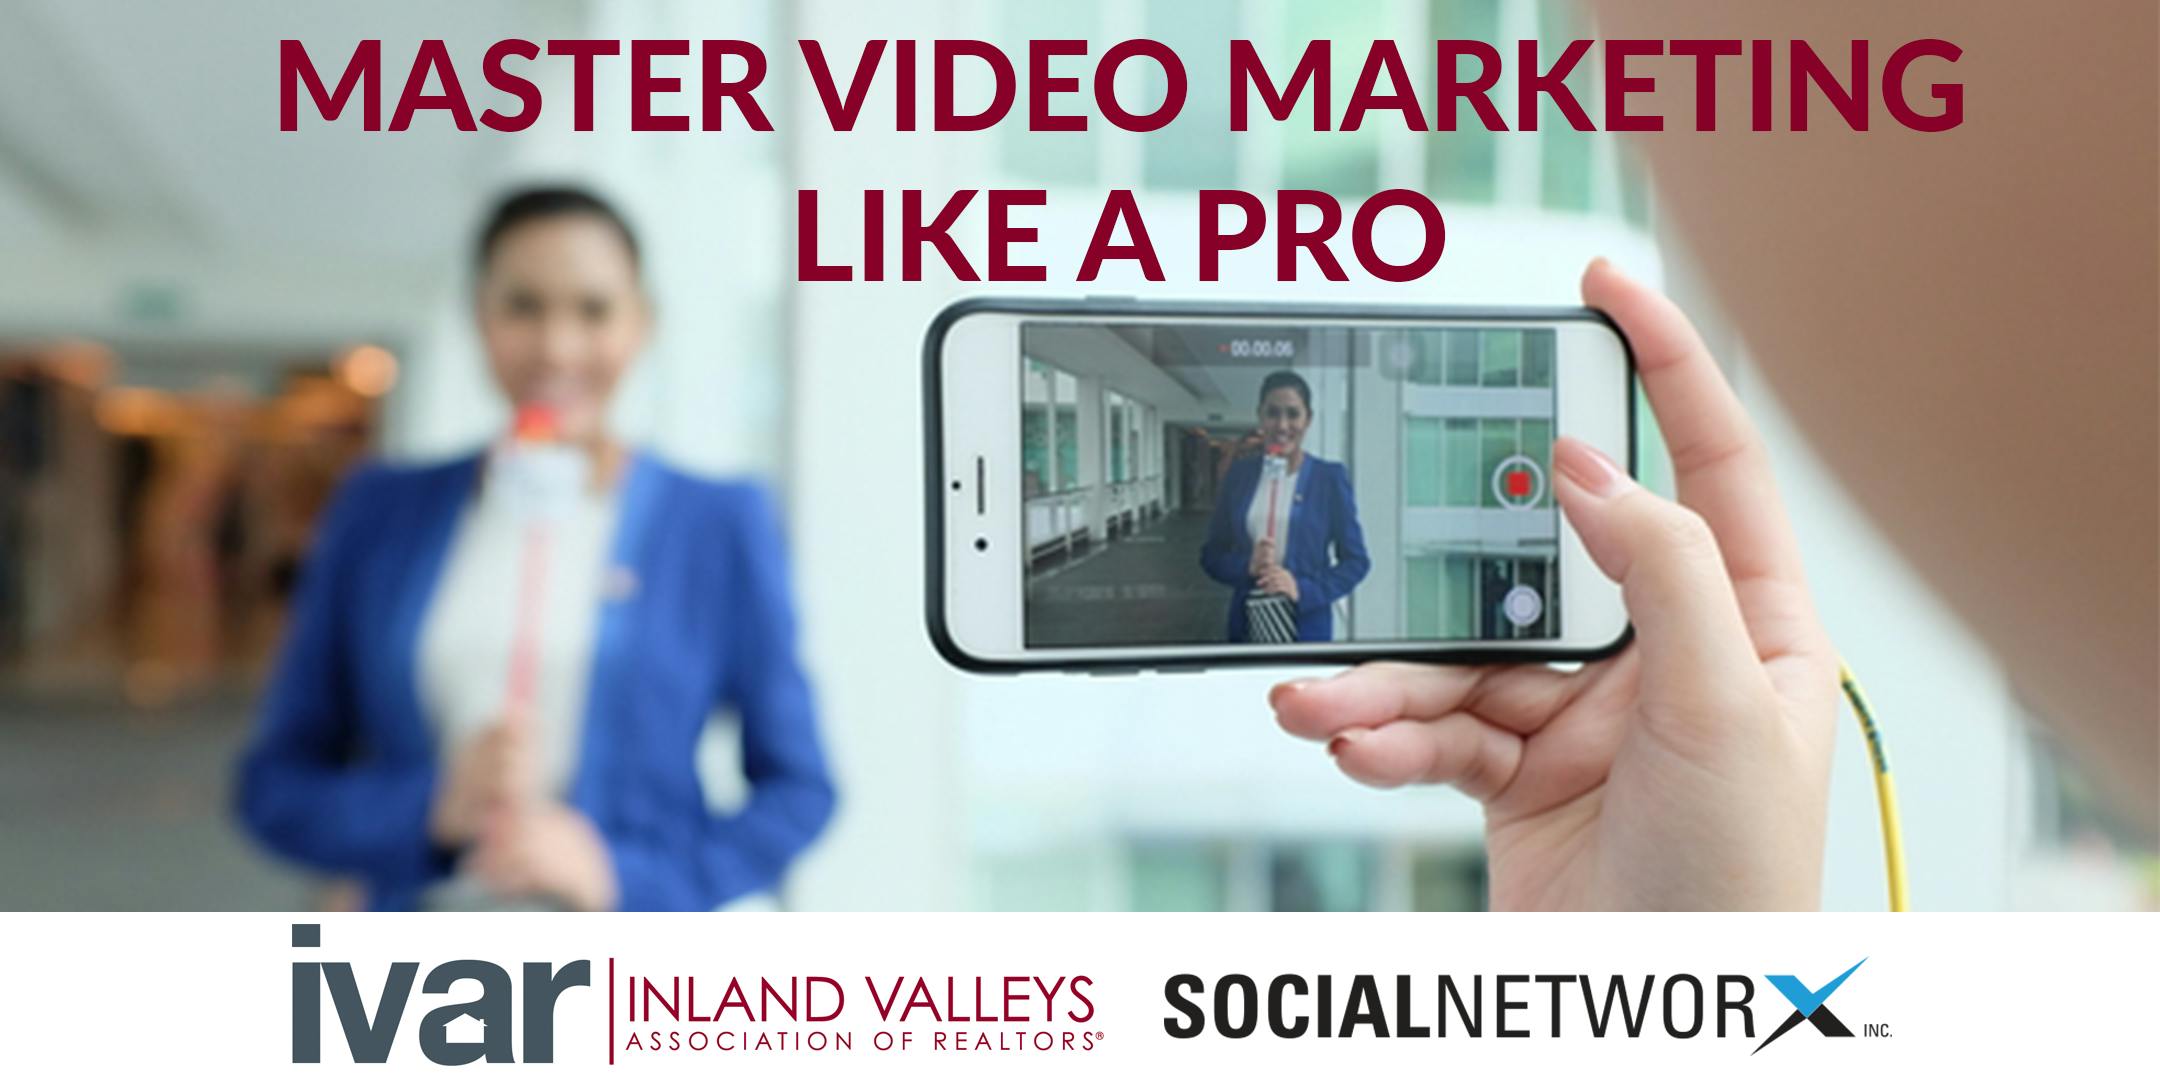 [IVAOR Event] Master Video Marketing Like a Pro with Social NetworX Inc.